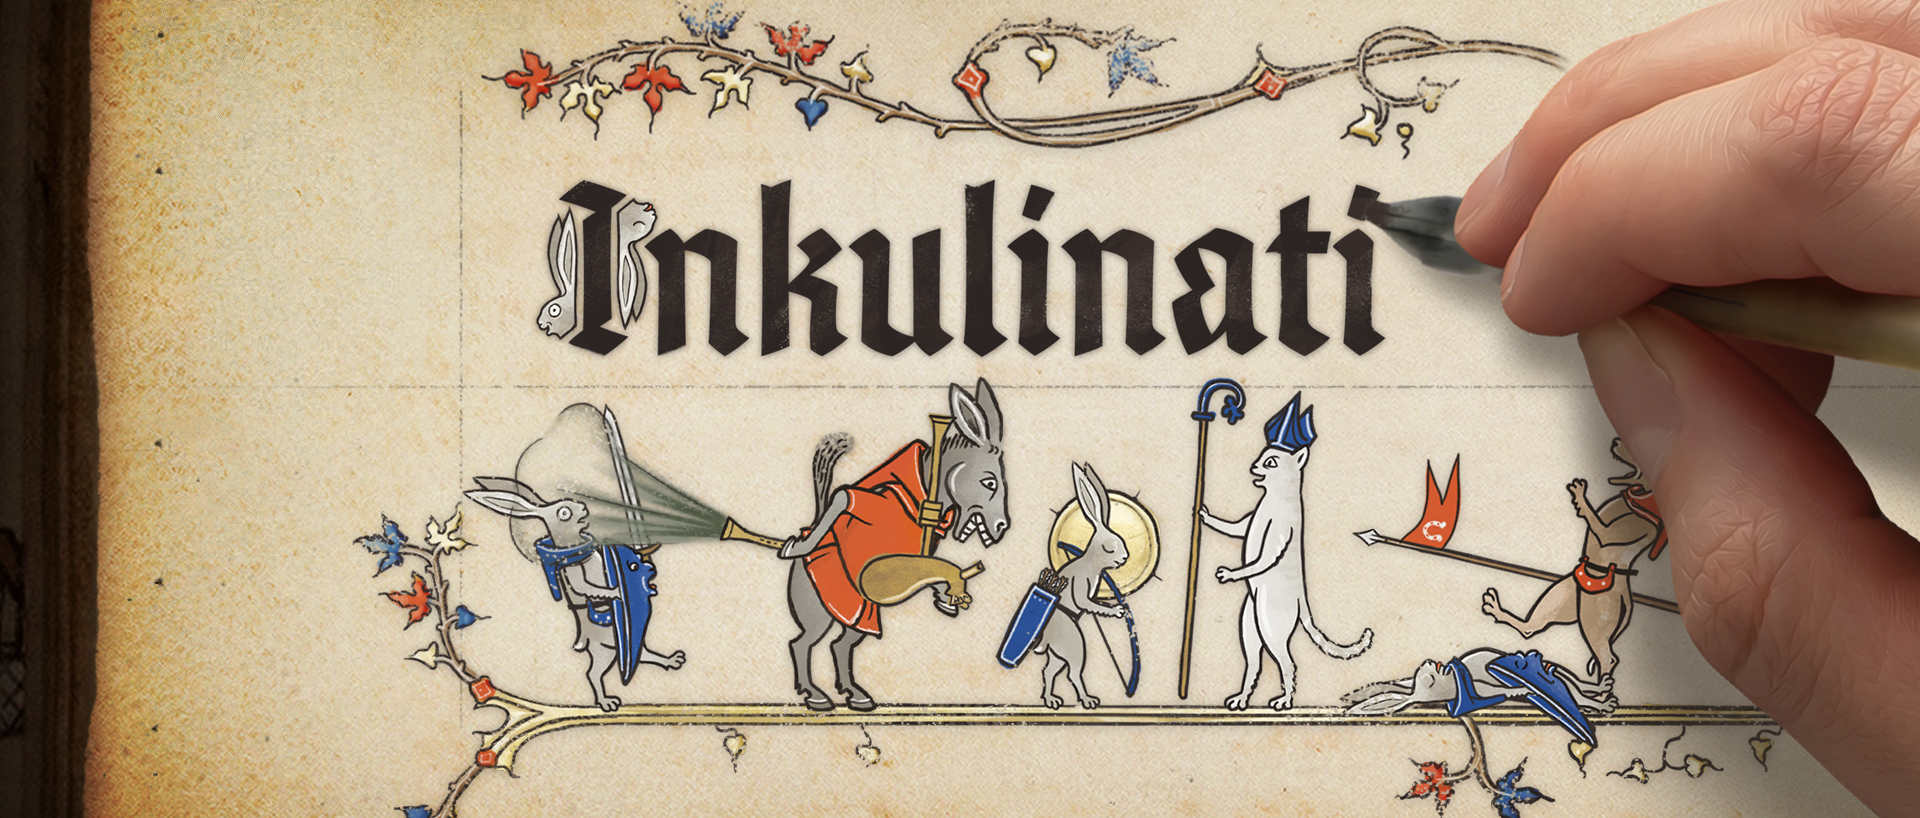 Medieval Manuscripts Take Center Stage in Innovative New Game